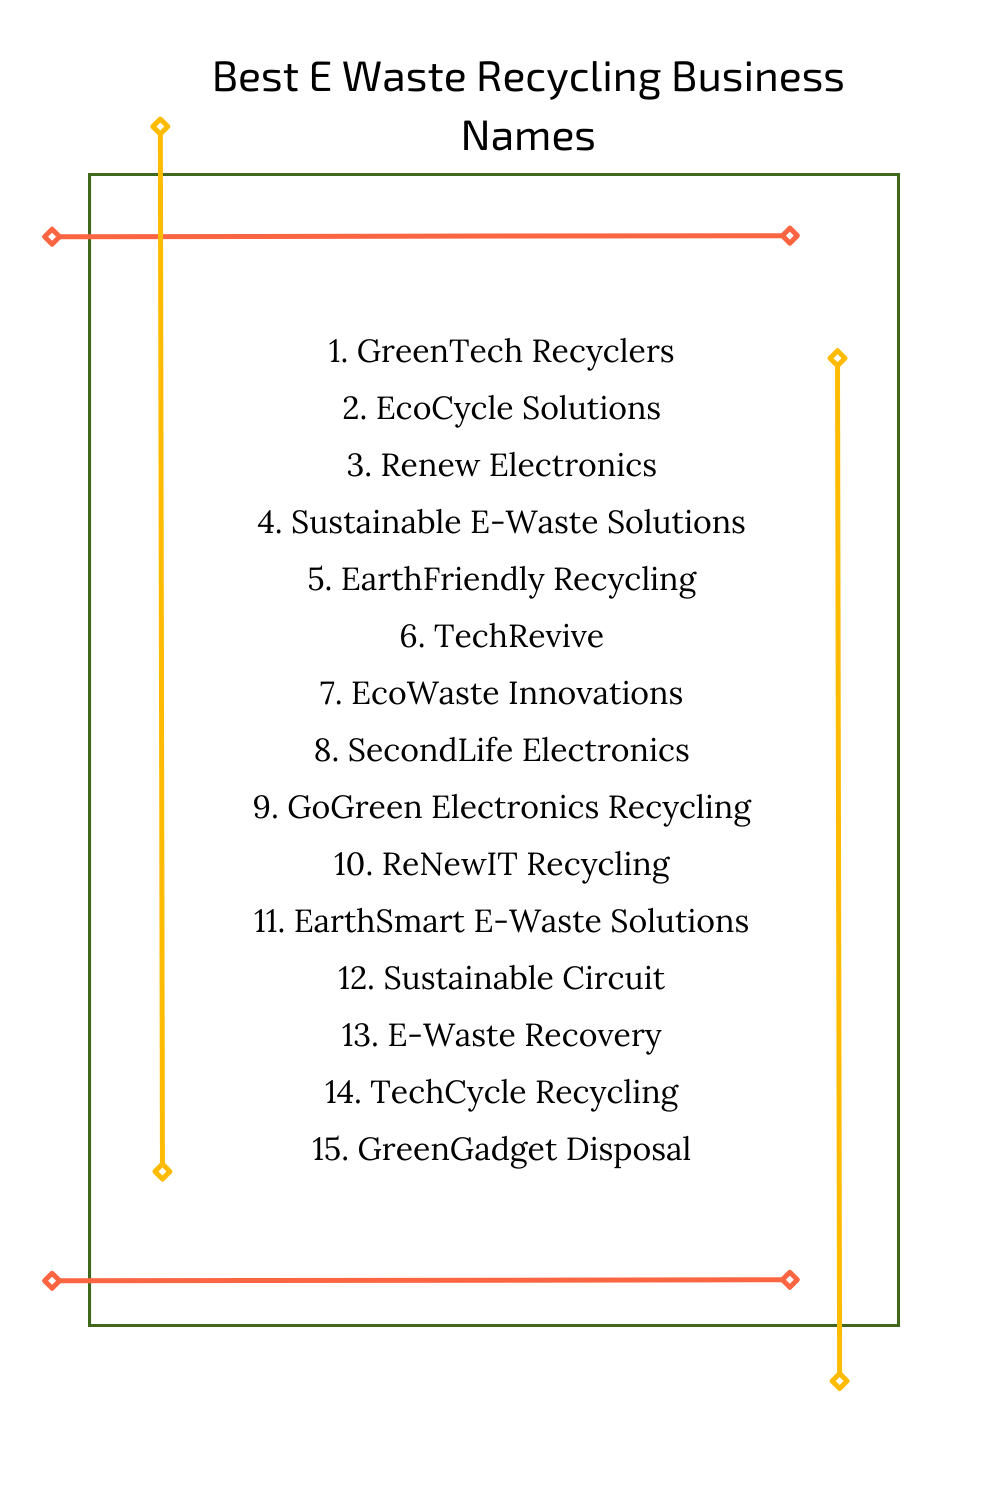 Best E Waste Recycling Business Names